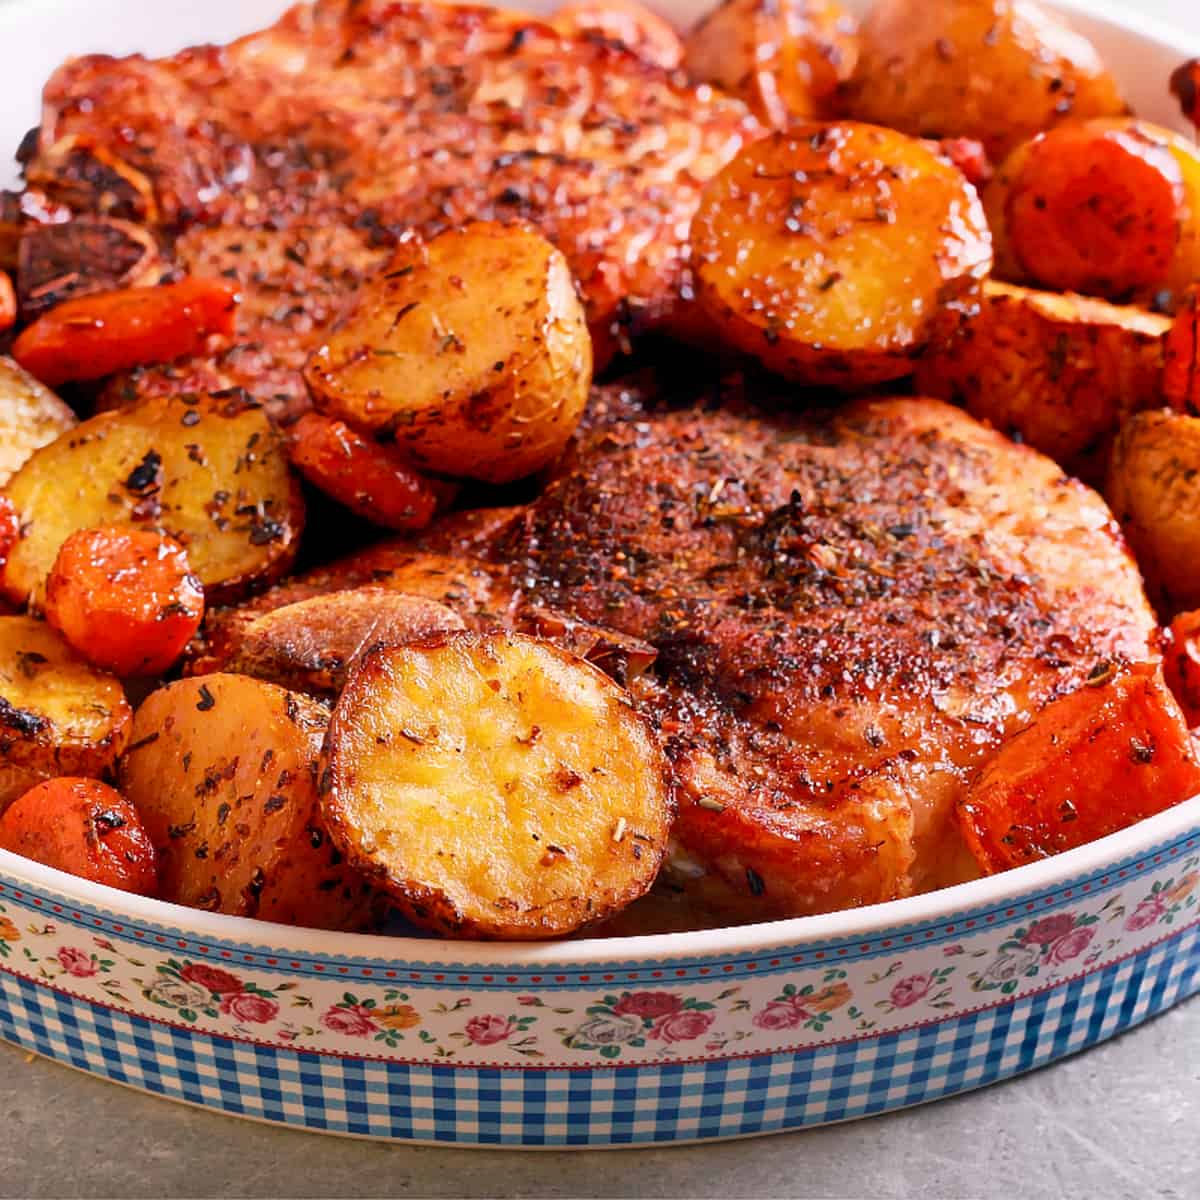 Spanish-style pork chops with new potatoes and olives - Spanish recipes for pork chops